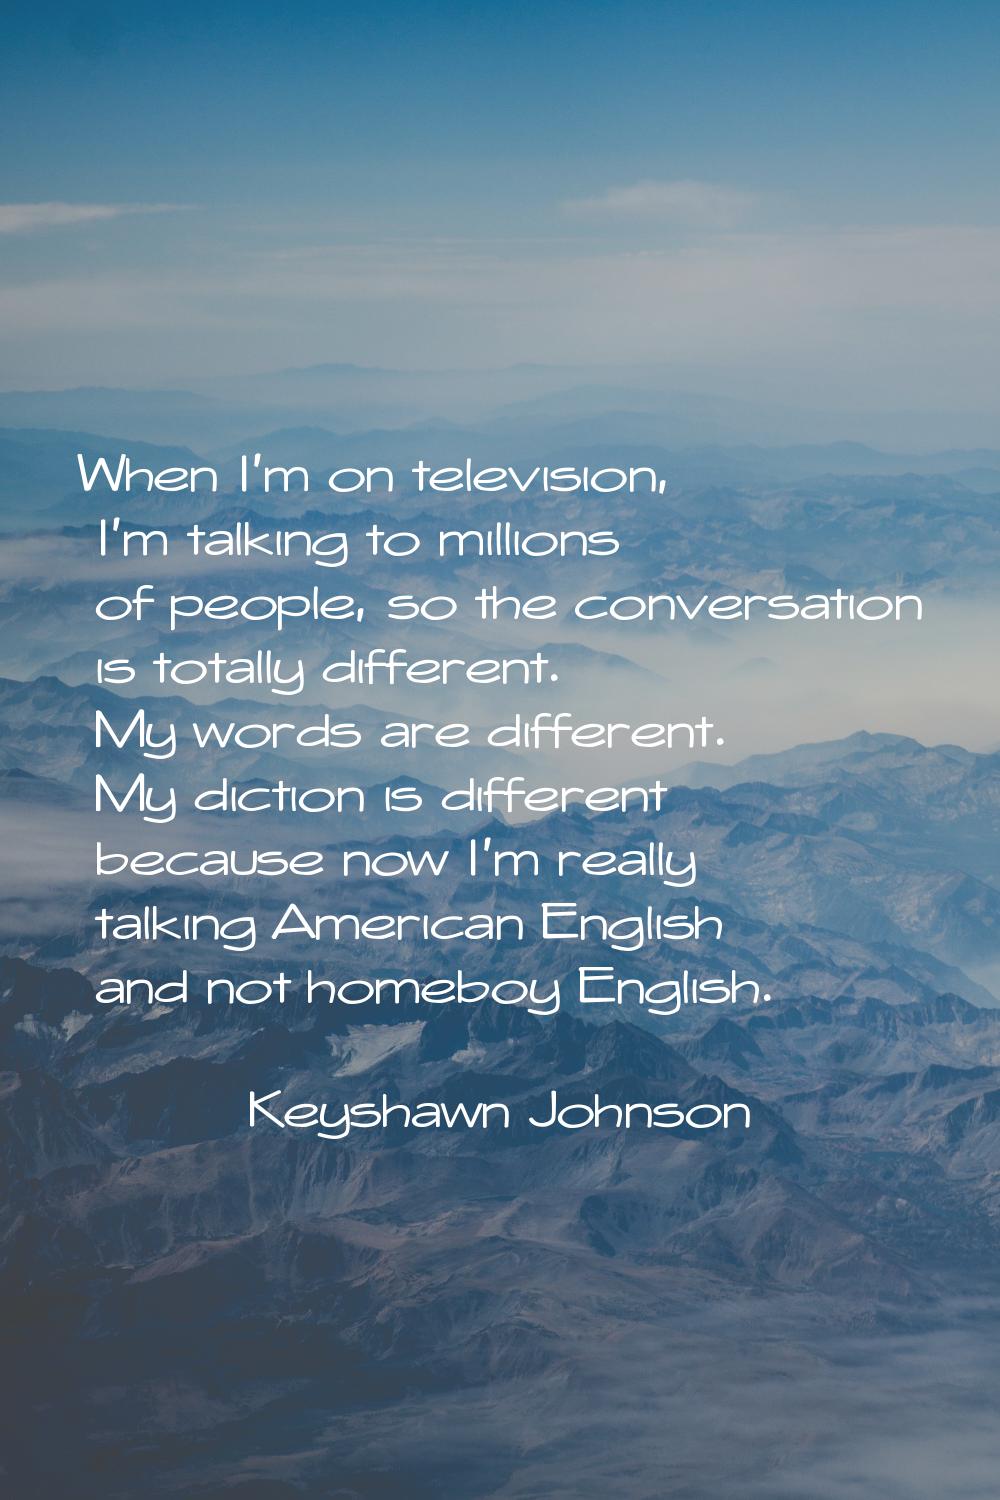 When I'm on television, I'm talking to millions of people, so the conversation is totally different